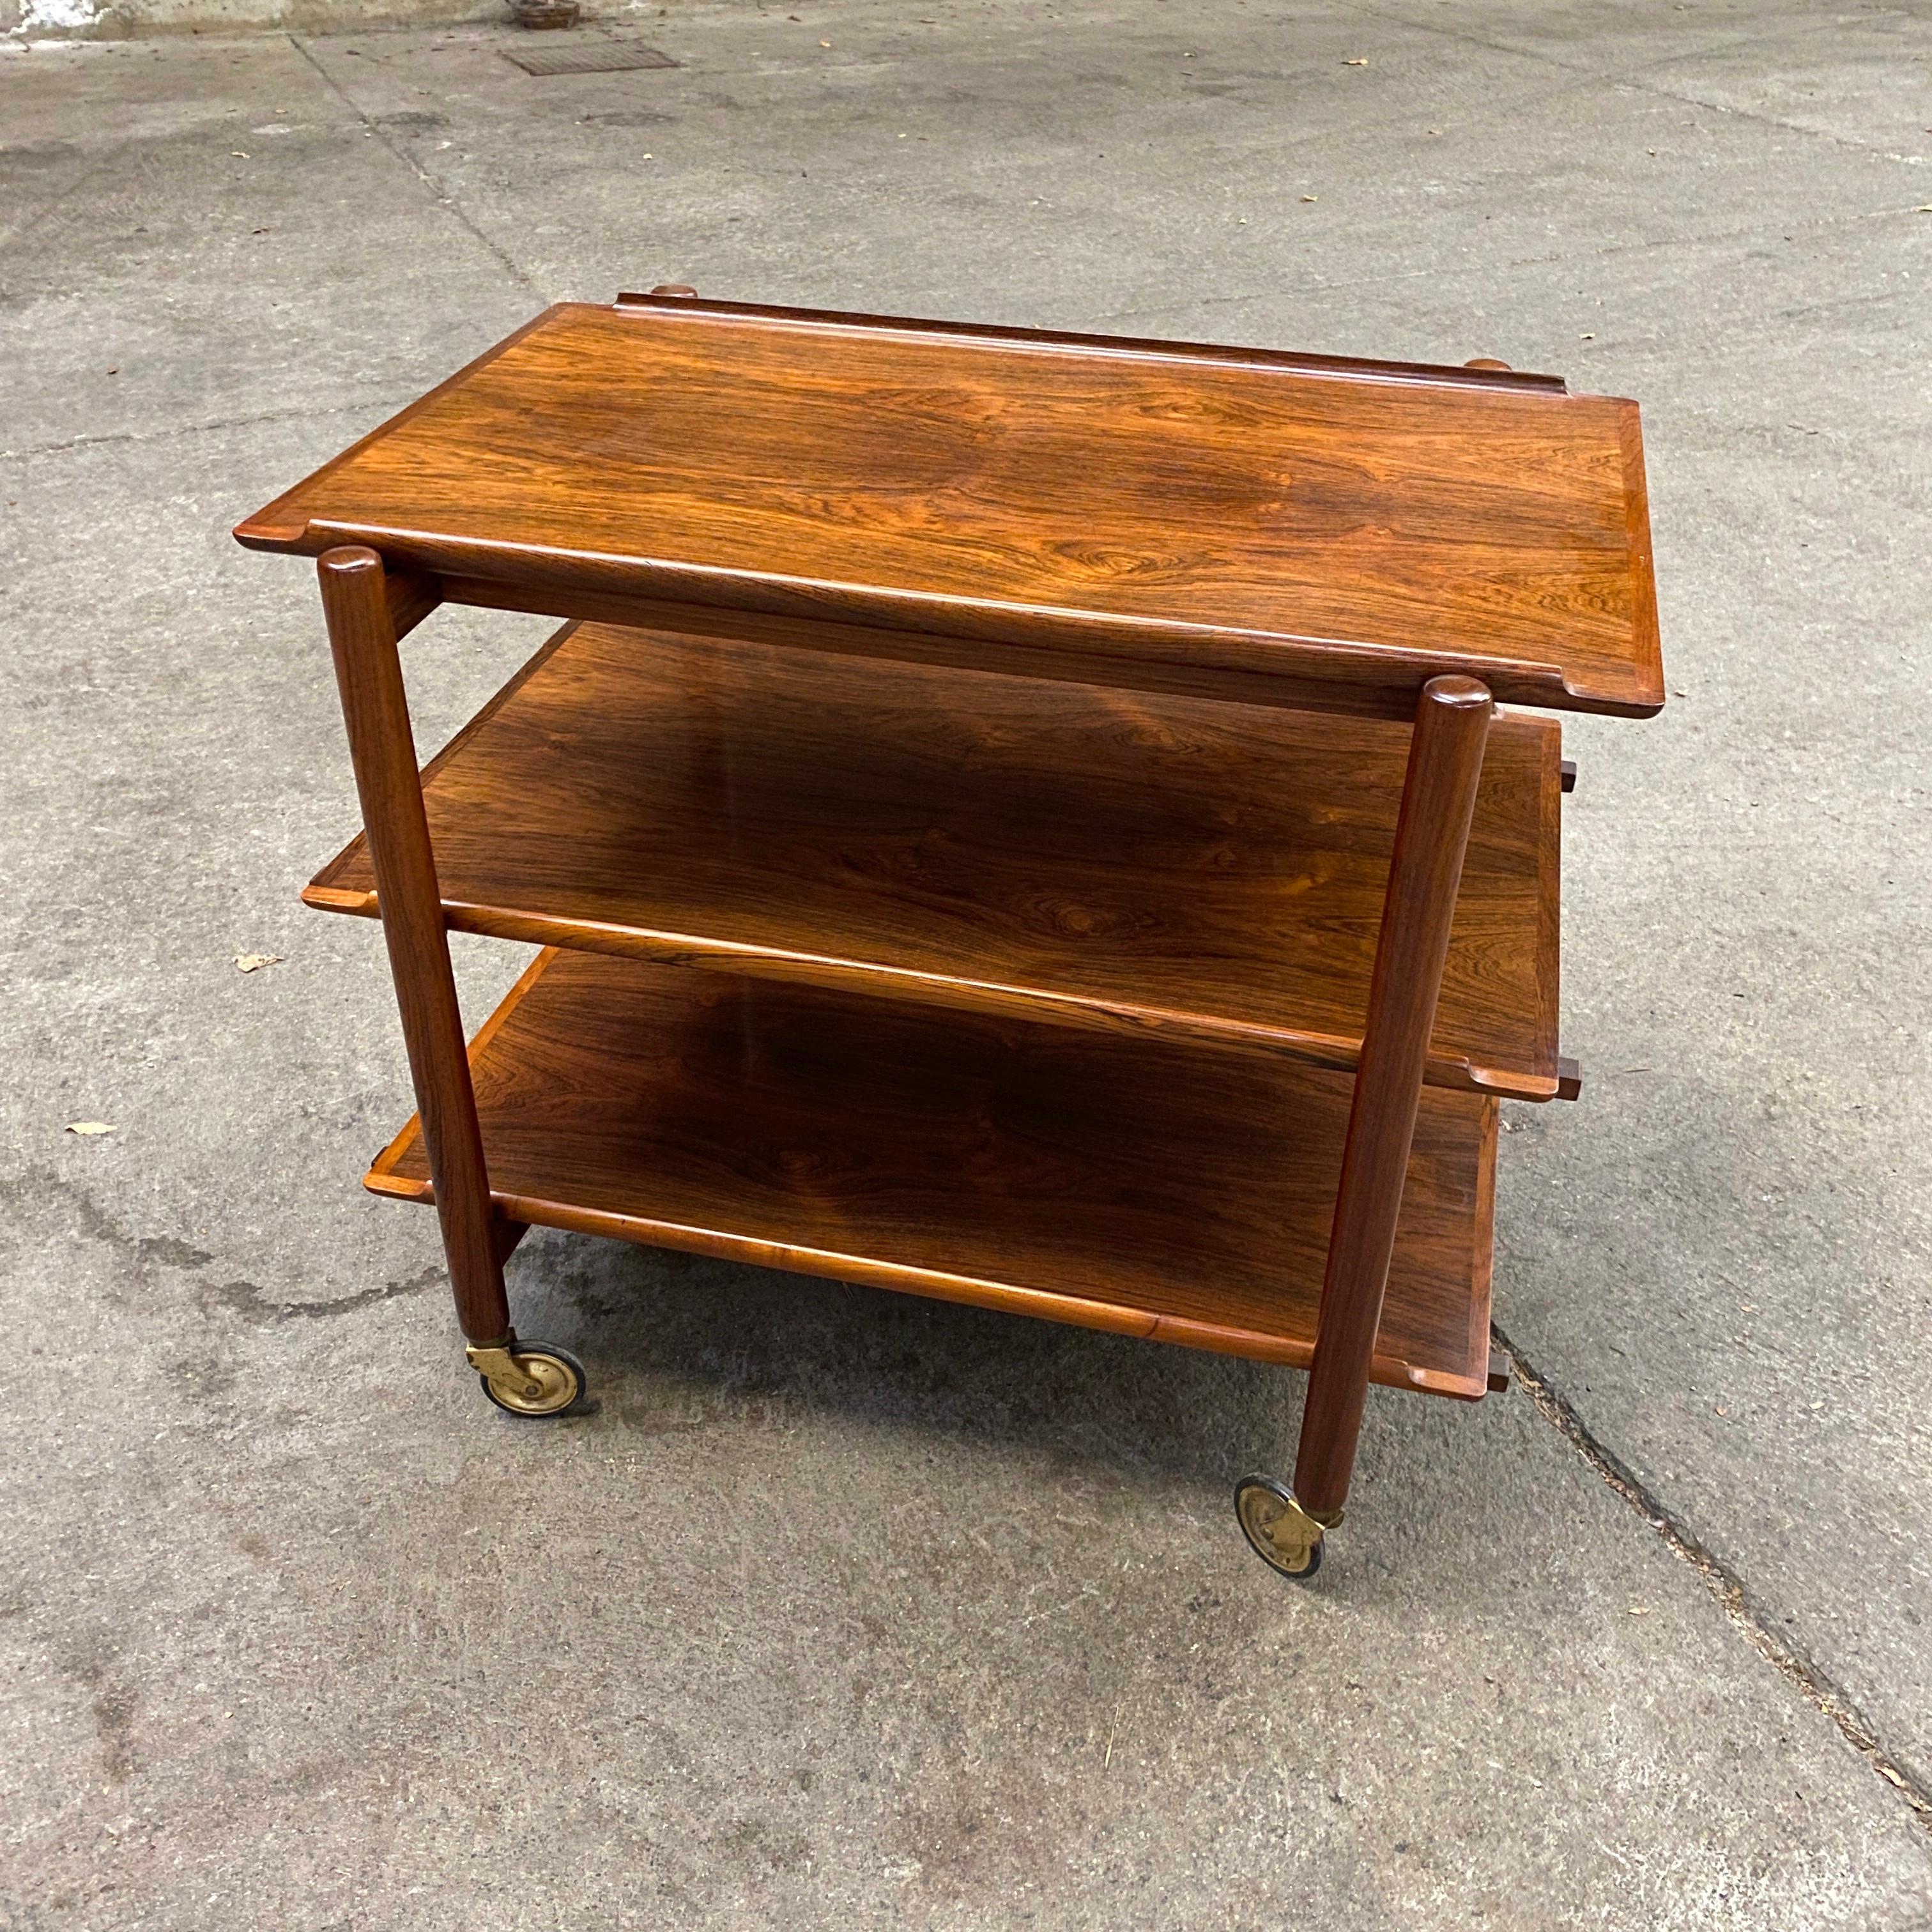 Rare rosewood trolley designed by Poul Hundevad. 
Produced by Poul Hundevad & Co Vamdrup in Denmark.